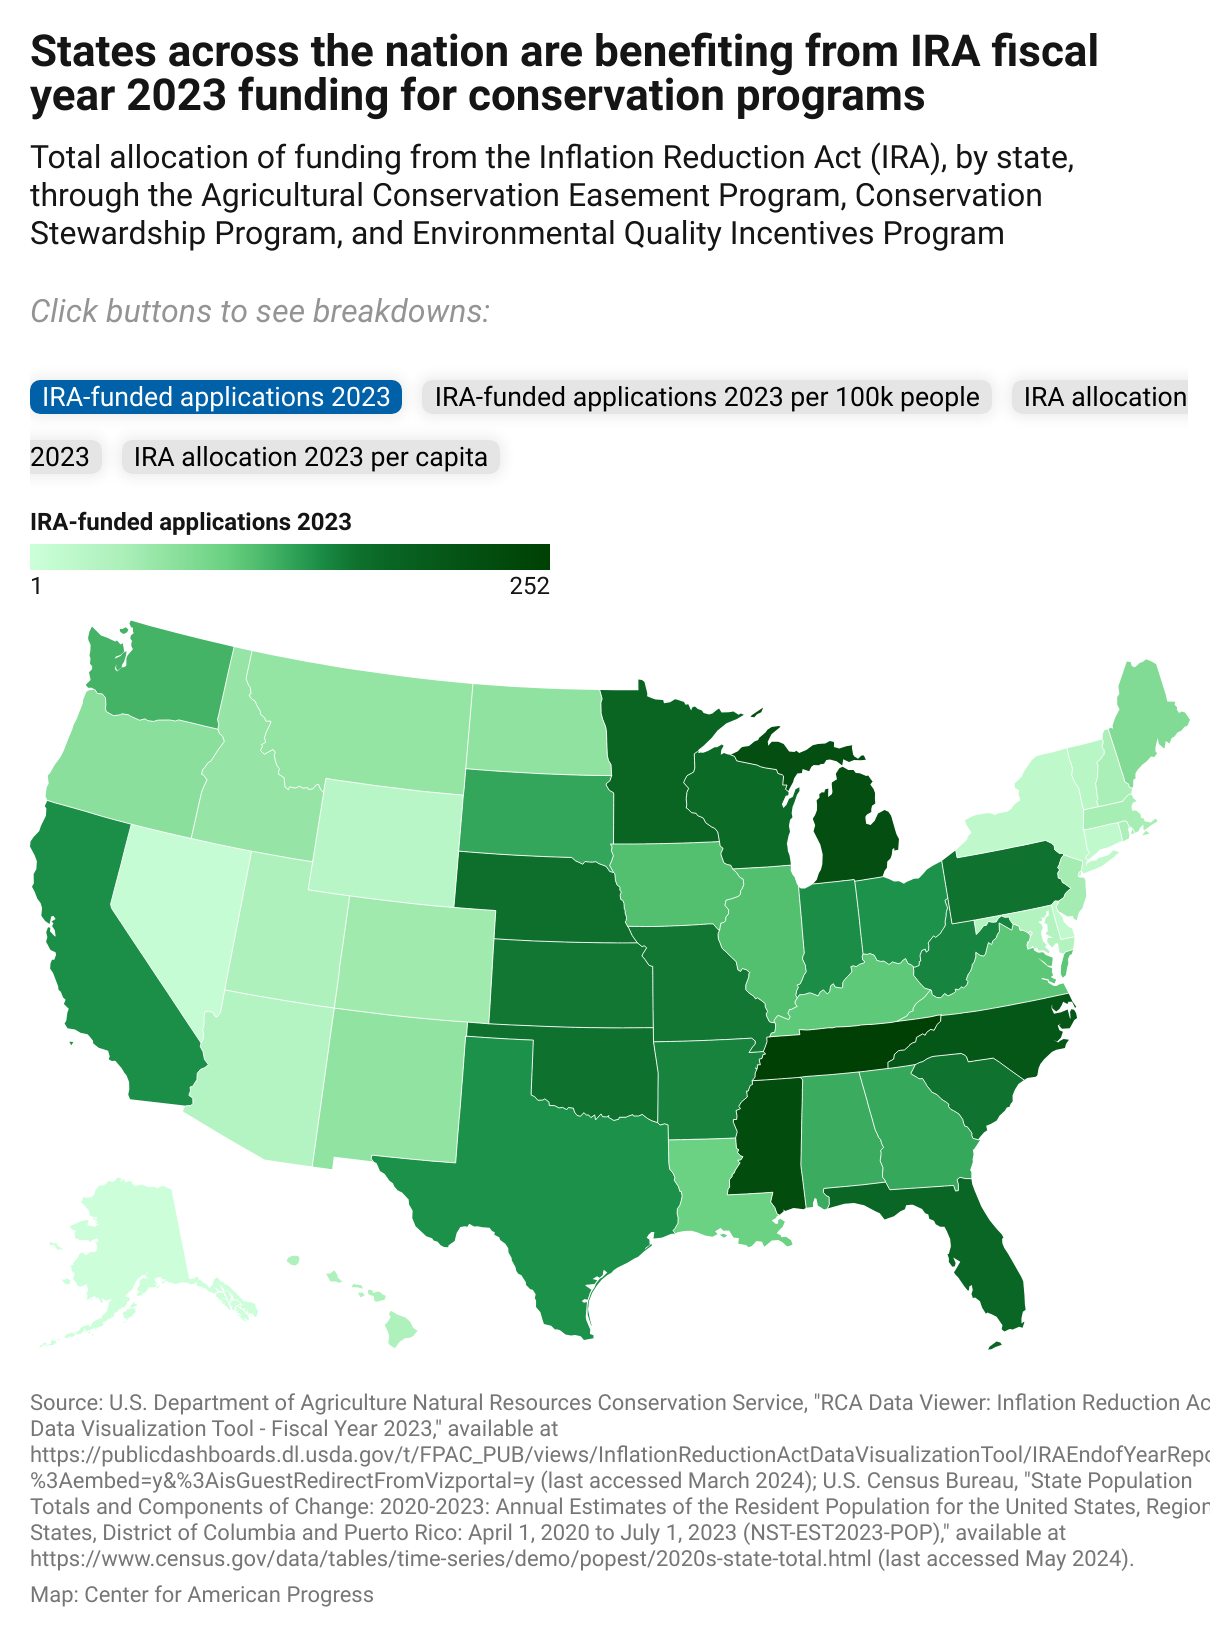 Map of the United States that uses different shades of coloration per state to reflect the amount of conservation program funding from the IRA for FY 2023, through the Agricultural Conservation Easement Program, Conservation Stewardship Program, and Environmental Quality Incentives Program.